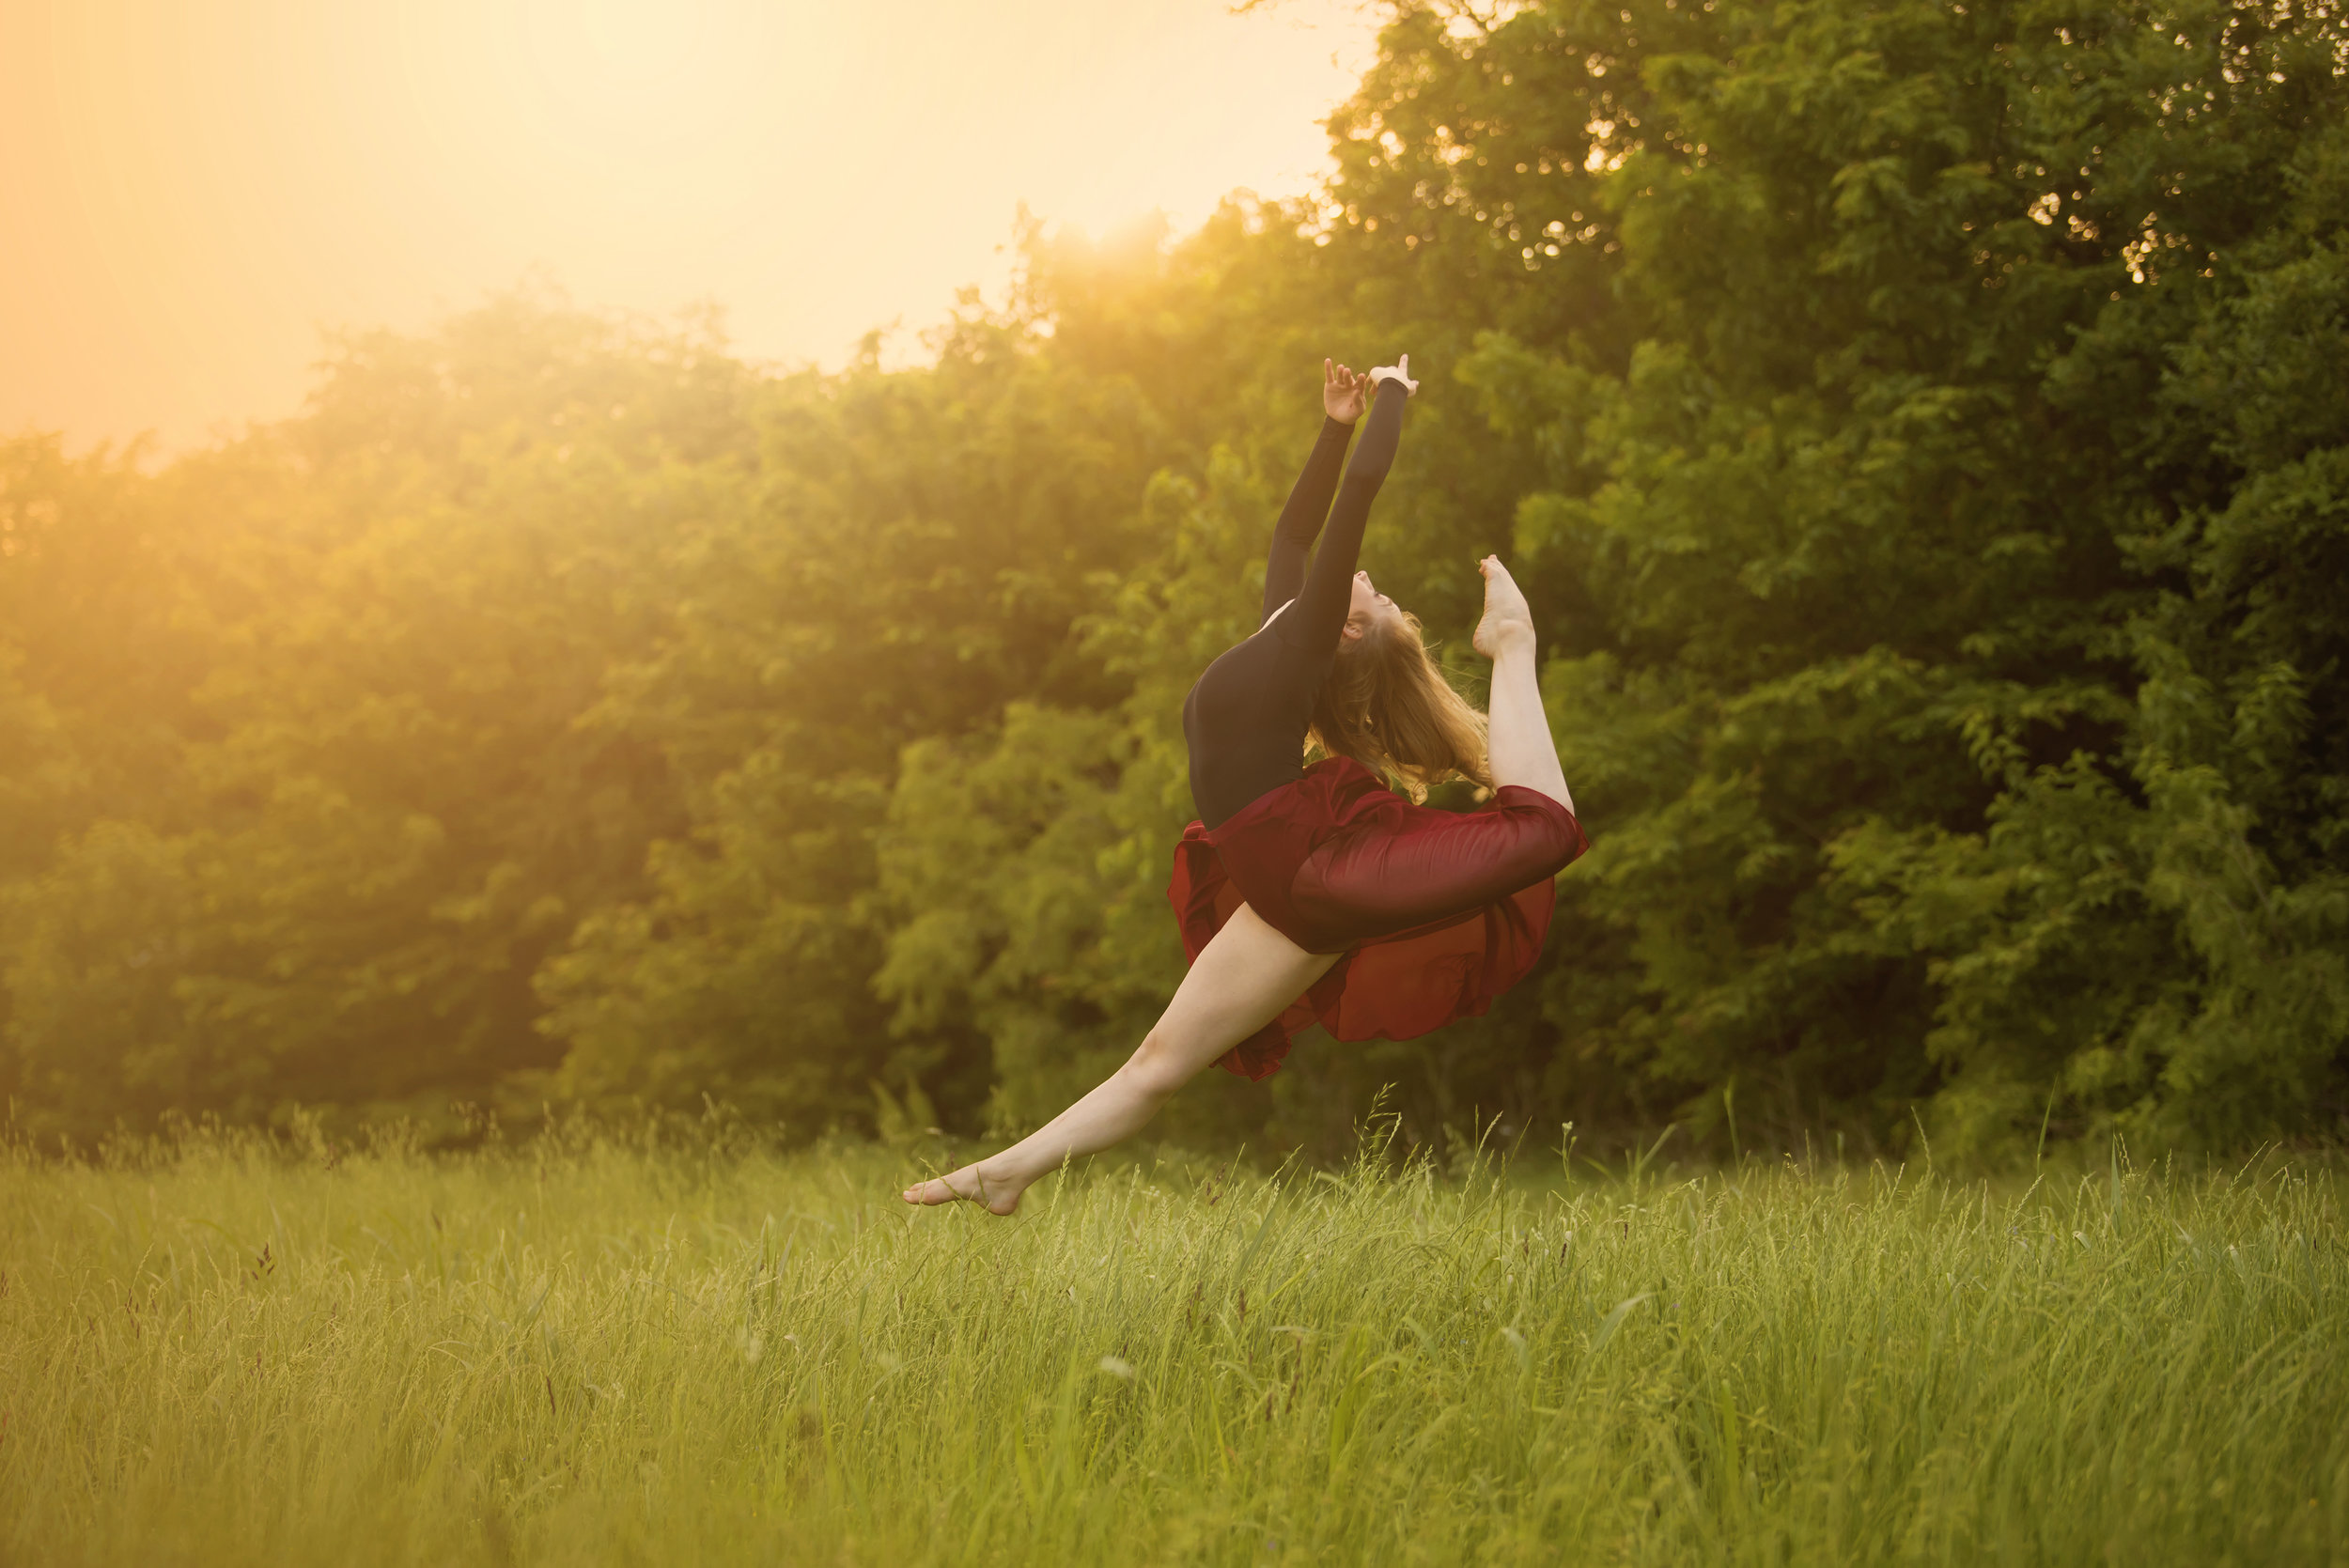  Sunset over trees in the background, woman in red dress jumping with legs and arms outstretched. 